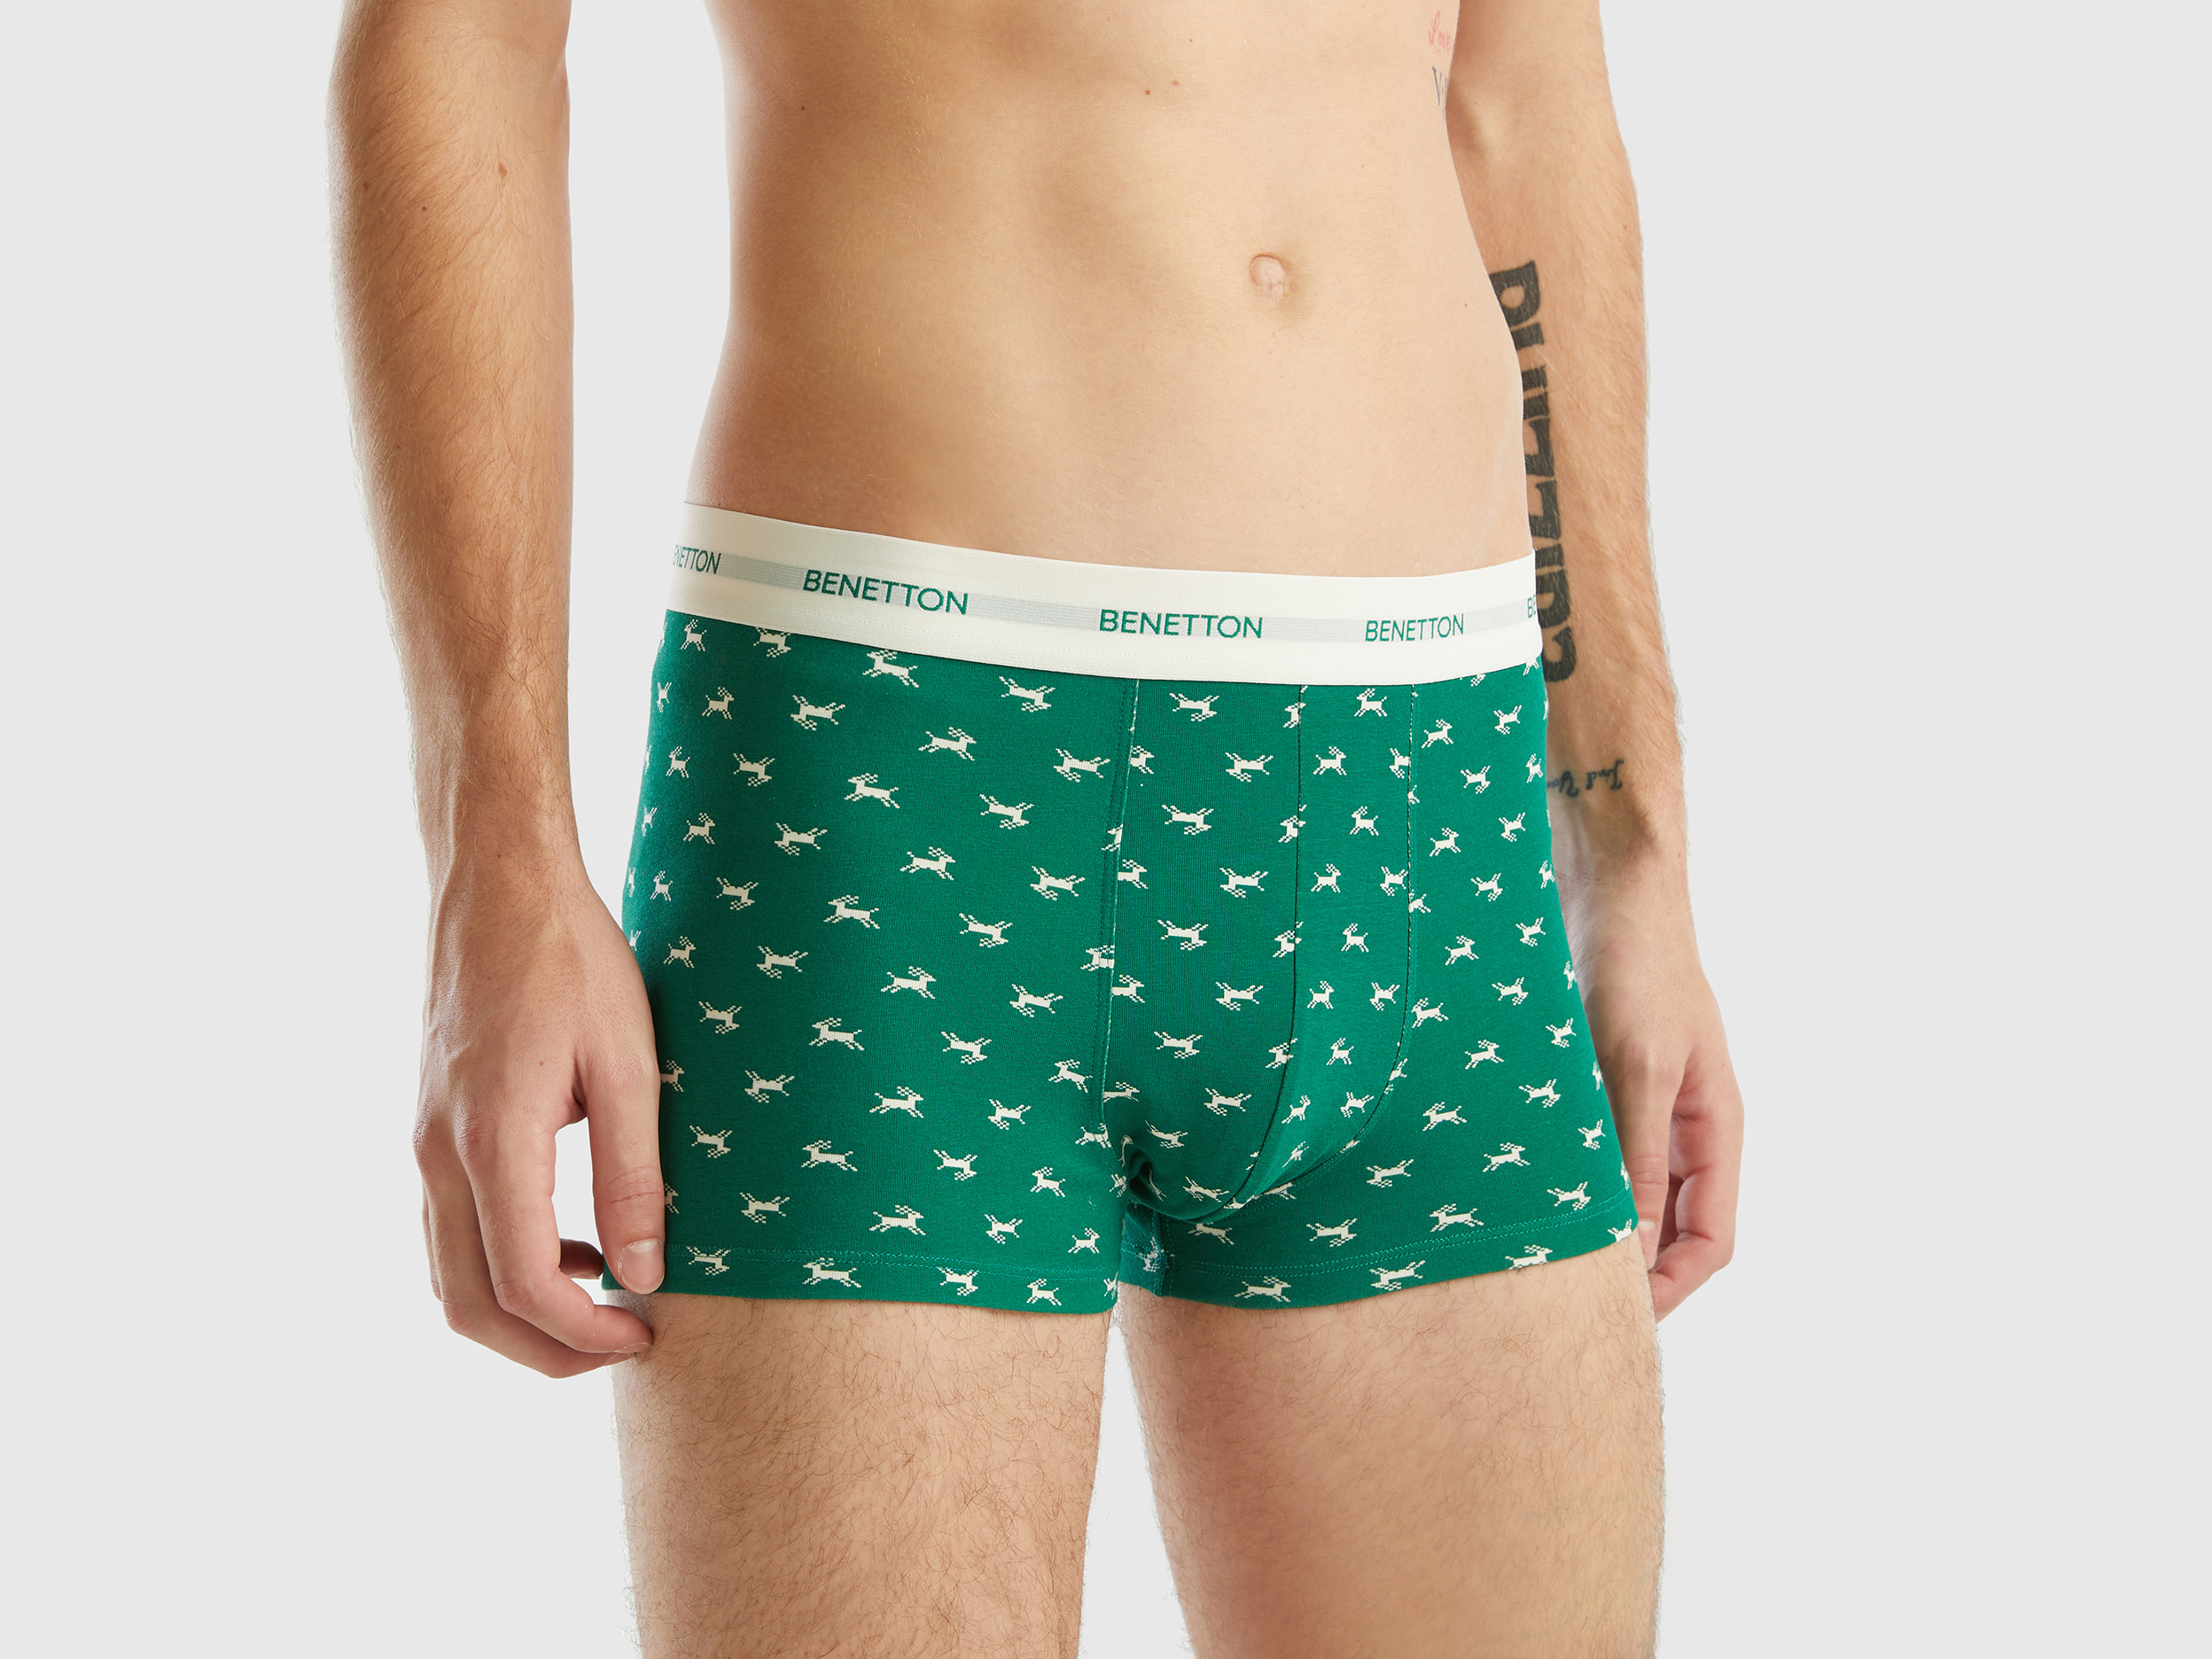 Benetton, Green Boxers With Reindeer Print, size L, Green, Men